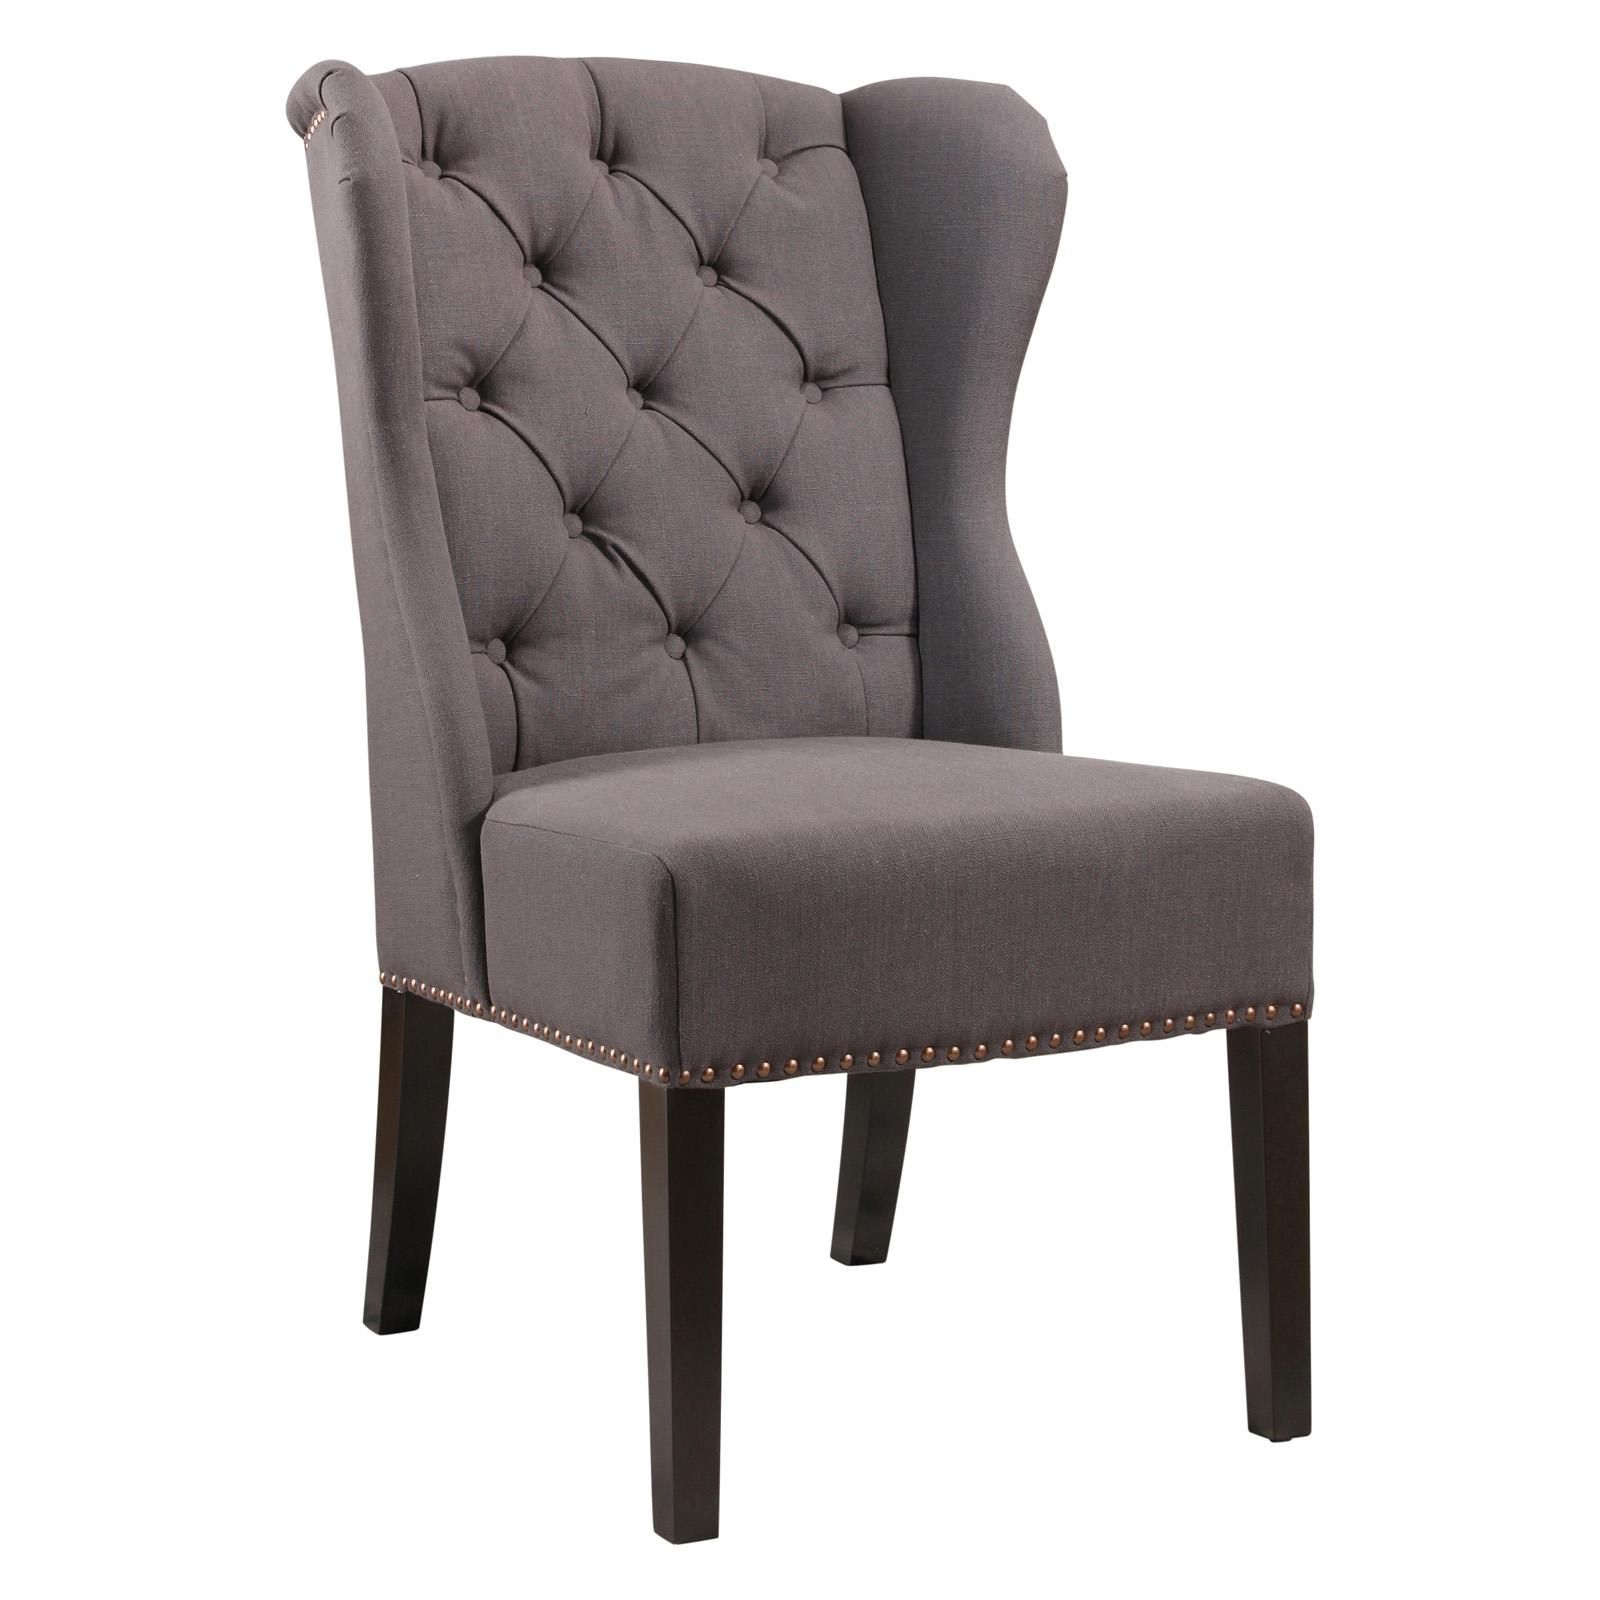 Abbyson Luca Linen Wingback Dining Chair Charcoal Gray | Hayneedle